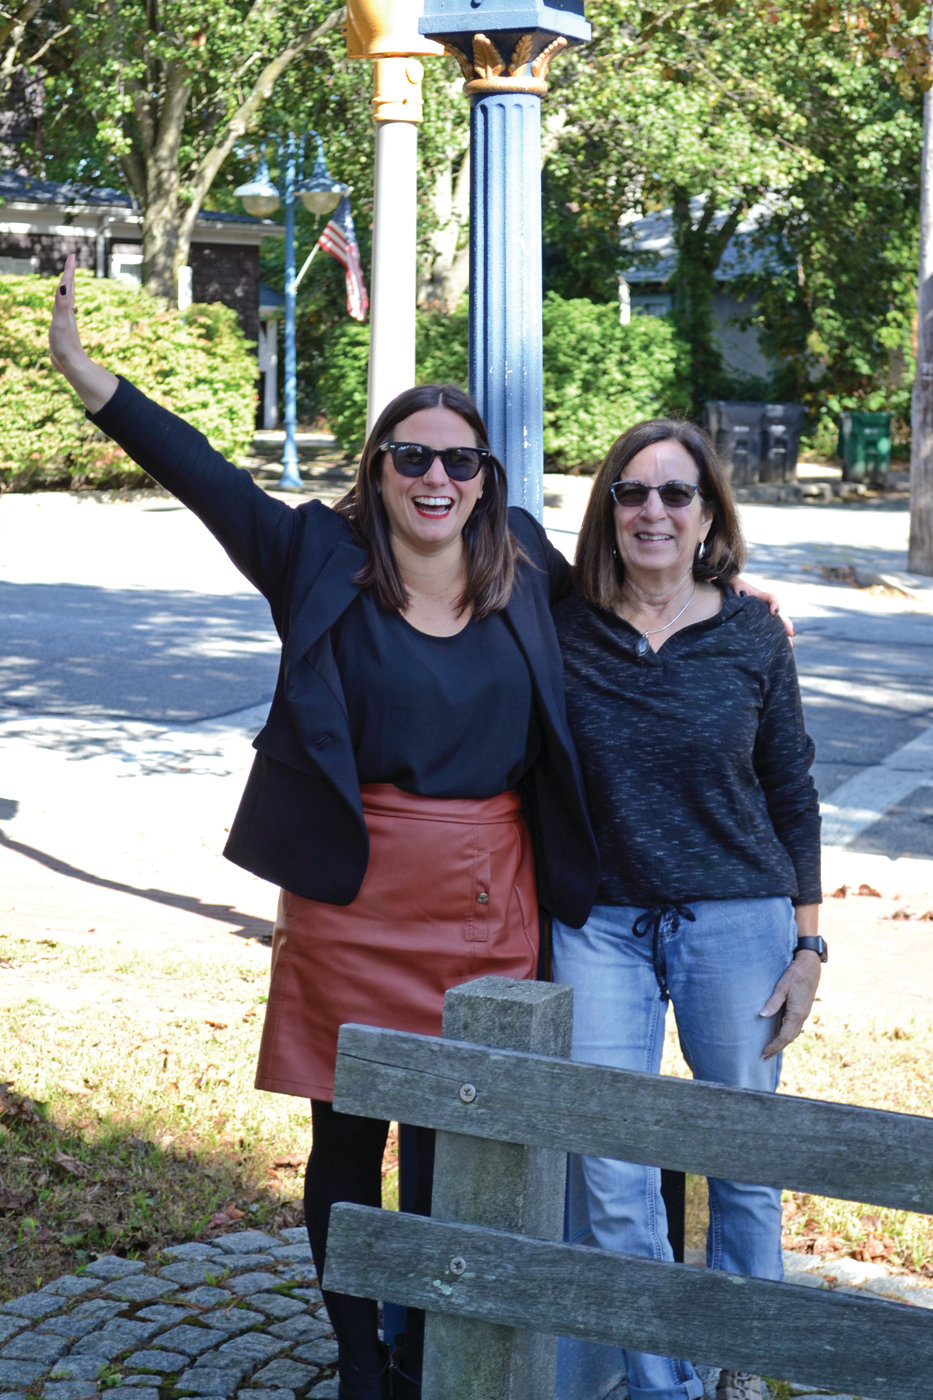 COME TO CONIMICUT: Meg Mut, a realtor with Century 21, and Virginia Barham, president of the Conimicut Village Association, are putting on a small business open house, with the hopes of bringing in new business owners to the historic Warwick village.